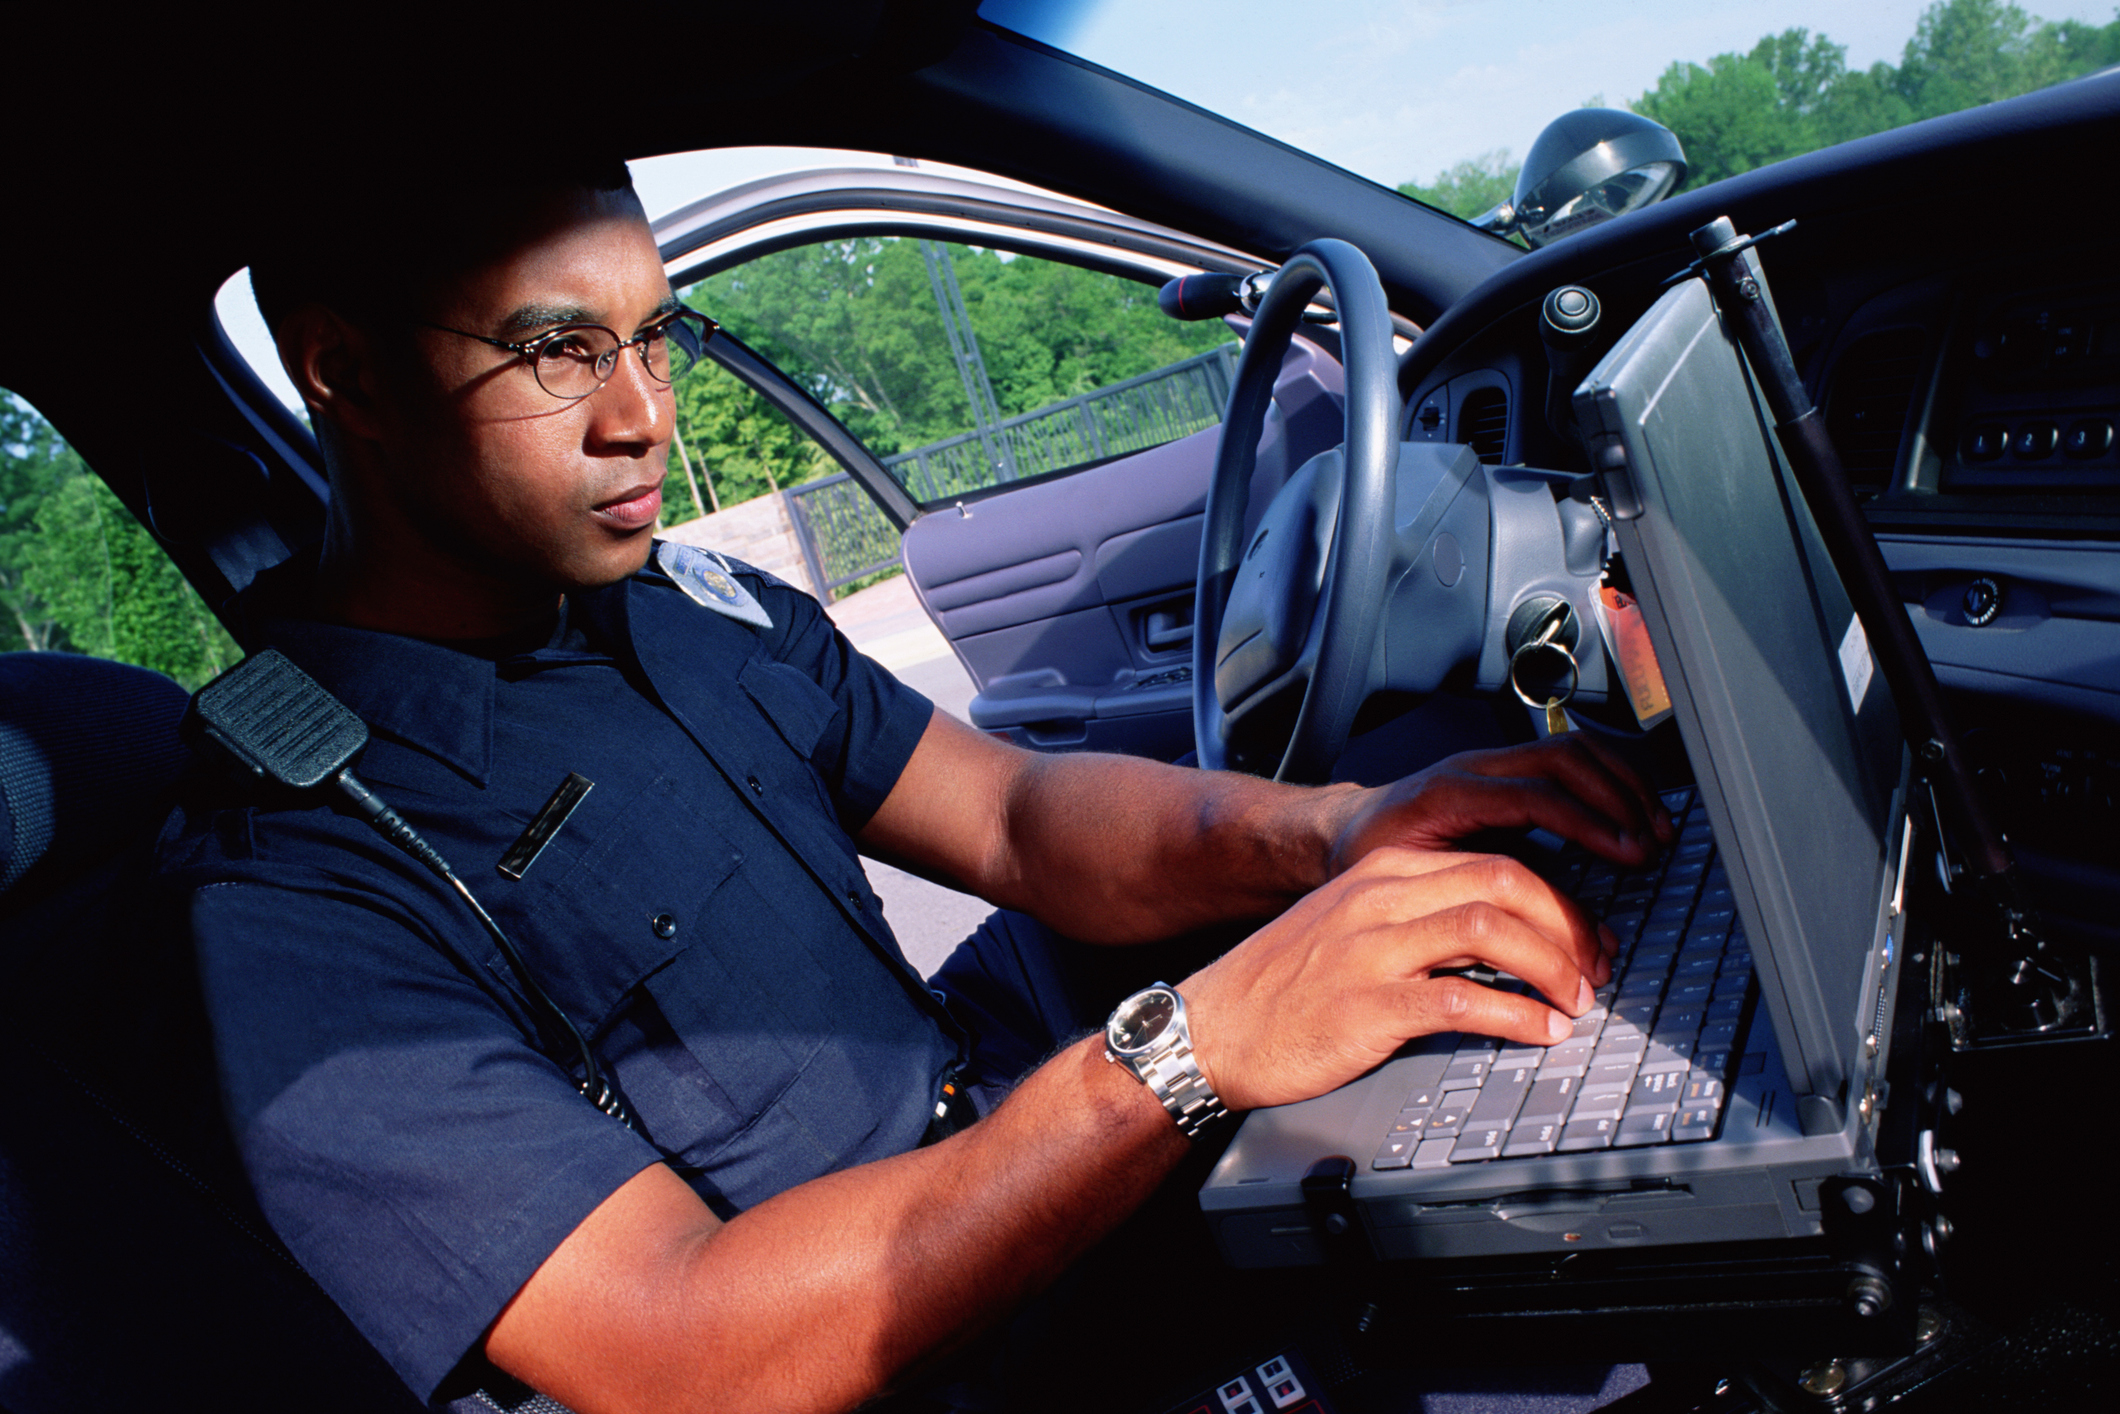 Policeman working on computer in car